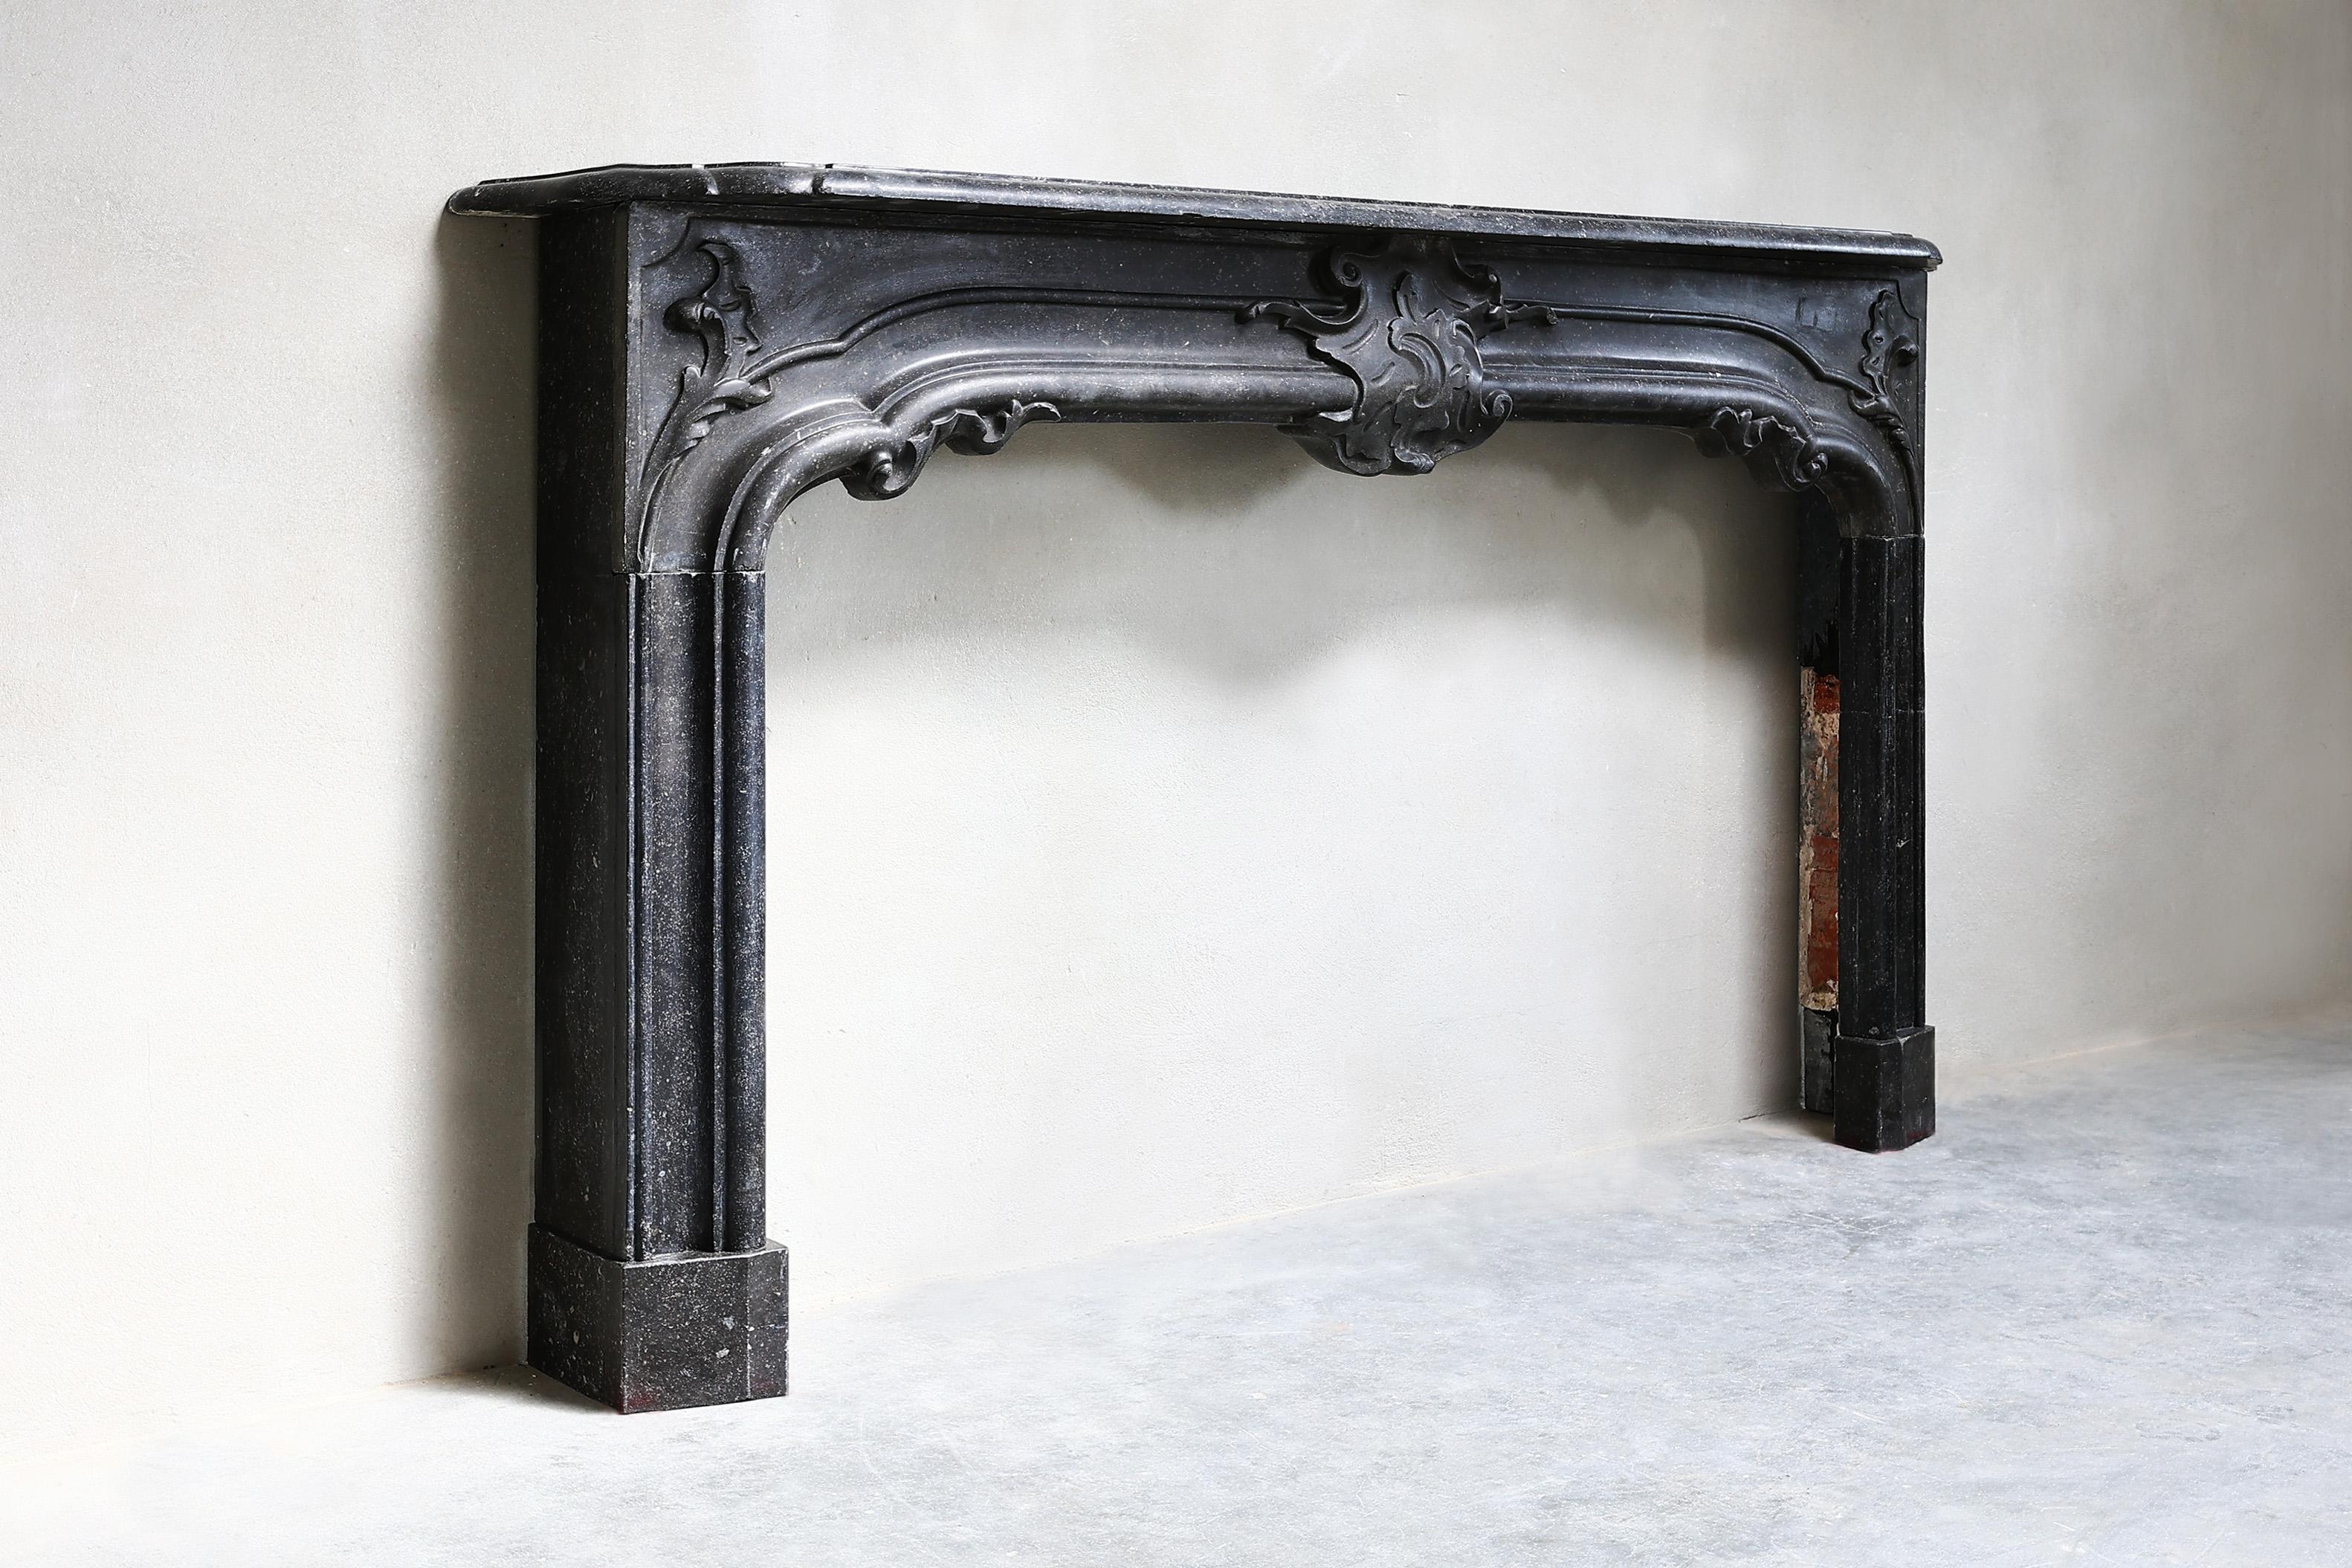 Beautifully decorated fireplace of Belgian bluestone from the 19th century with a width of no less than 208 cm. This fireplace is in the style of Louis XVI. A beautiful striking fireplace with ornaments in the middle of the front part and on the